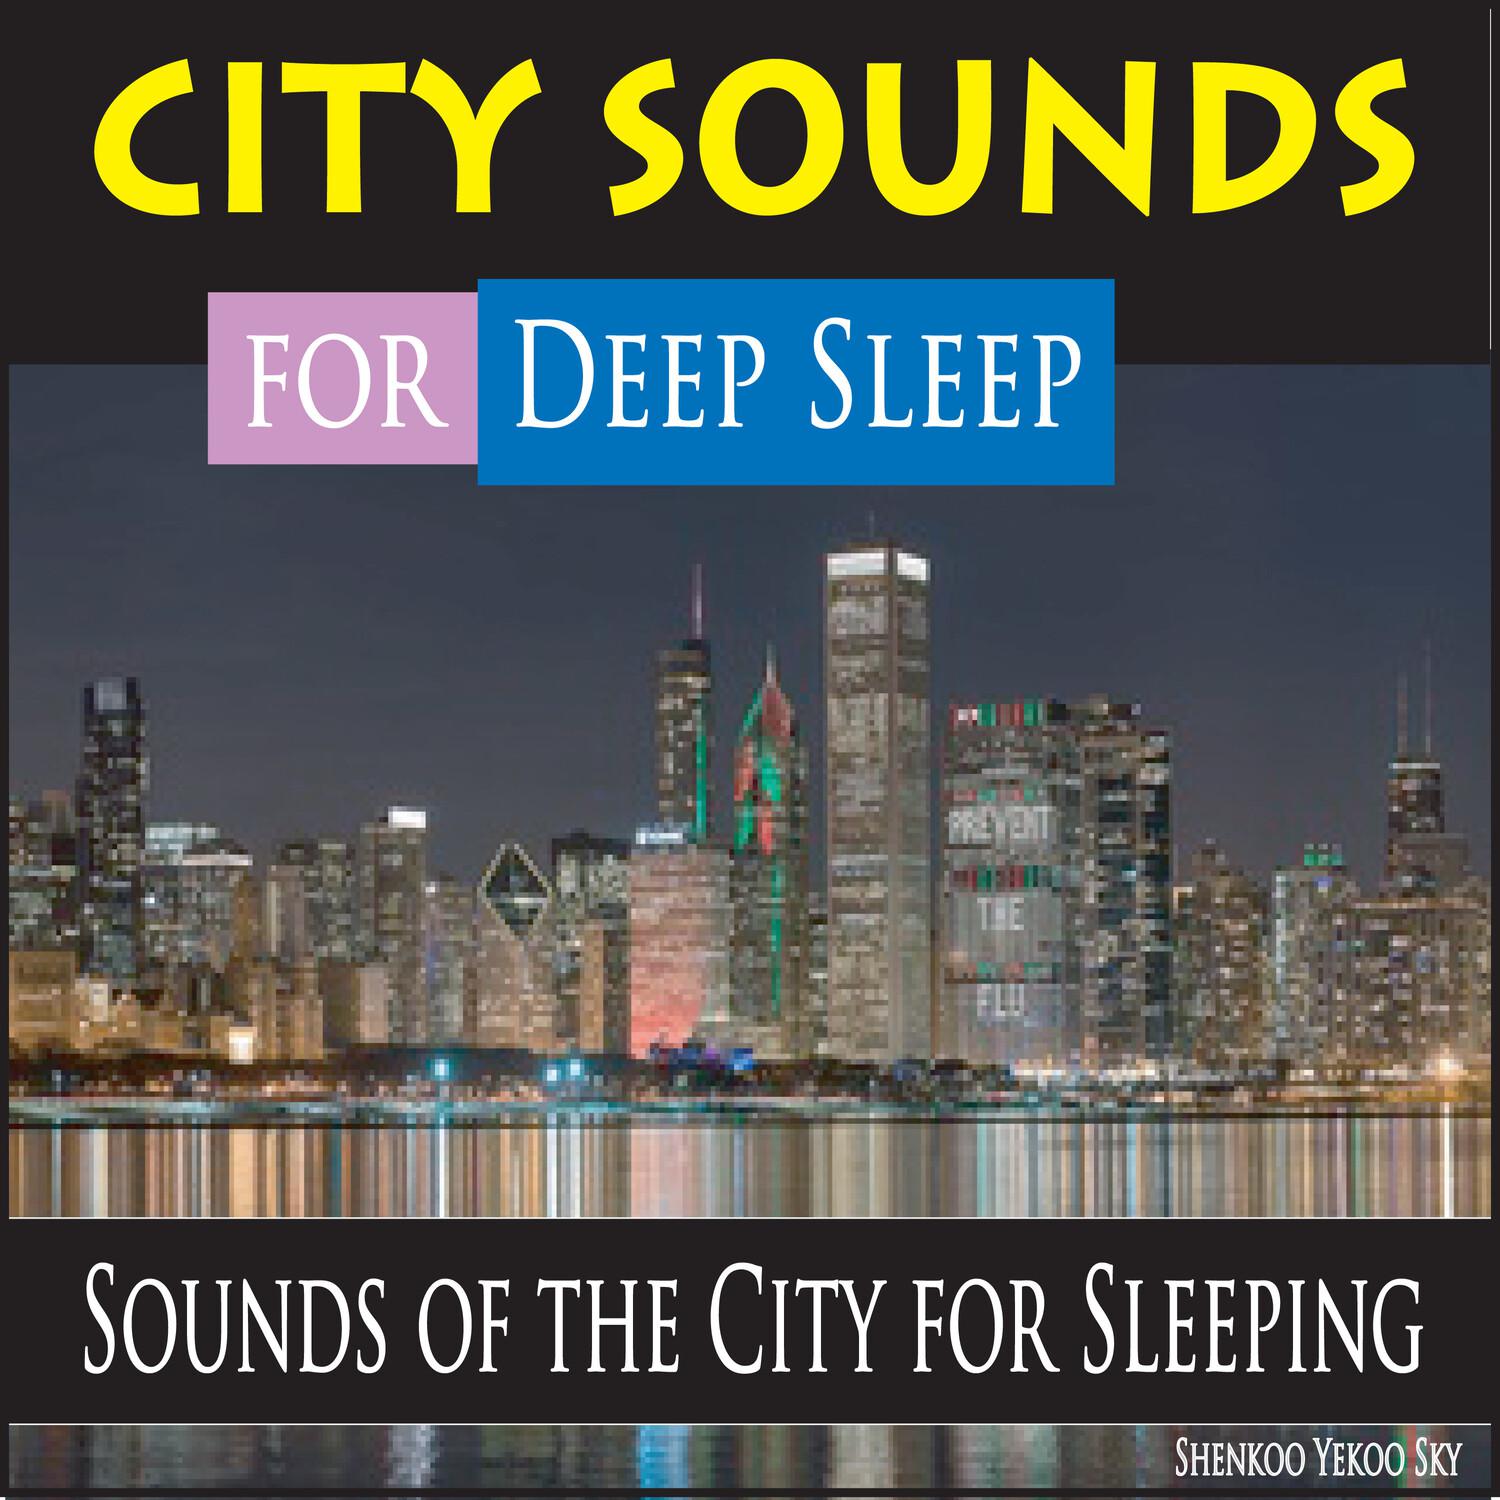 City Sounds for Deep Sleep: Sounds of the City for Sleeping